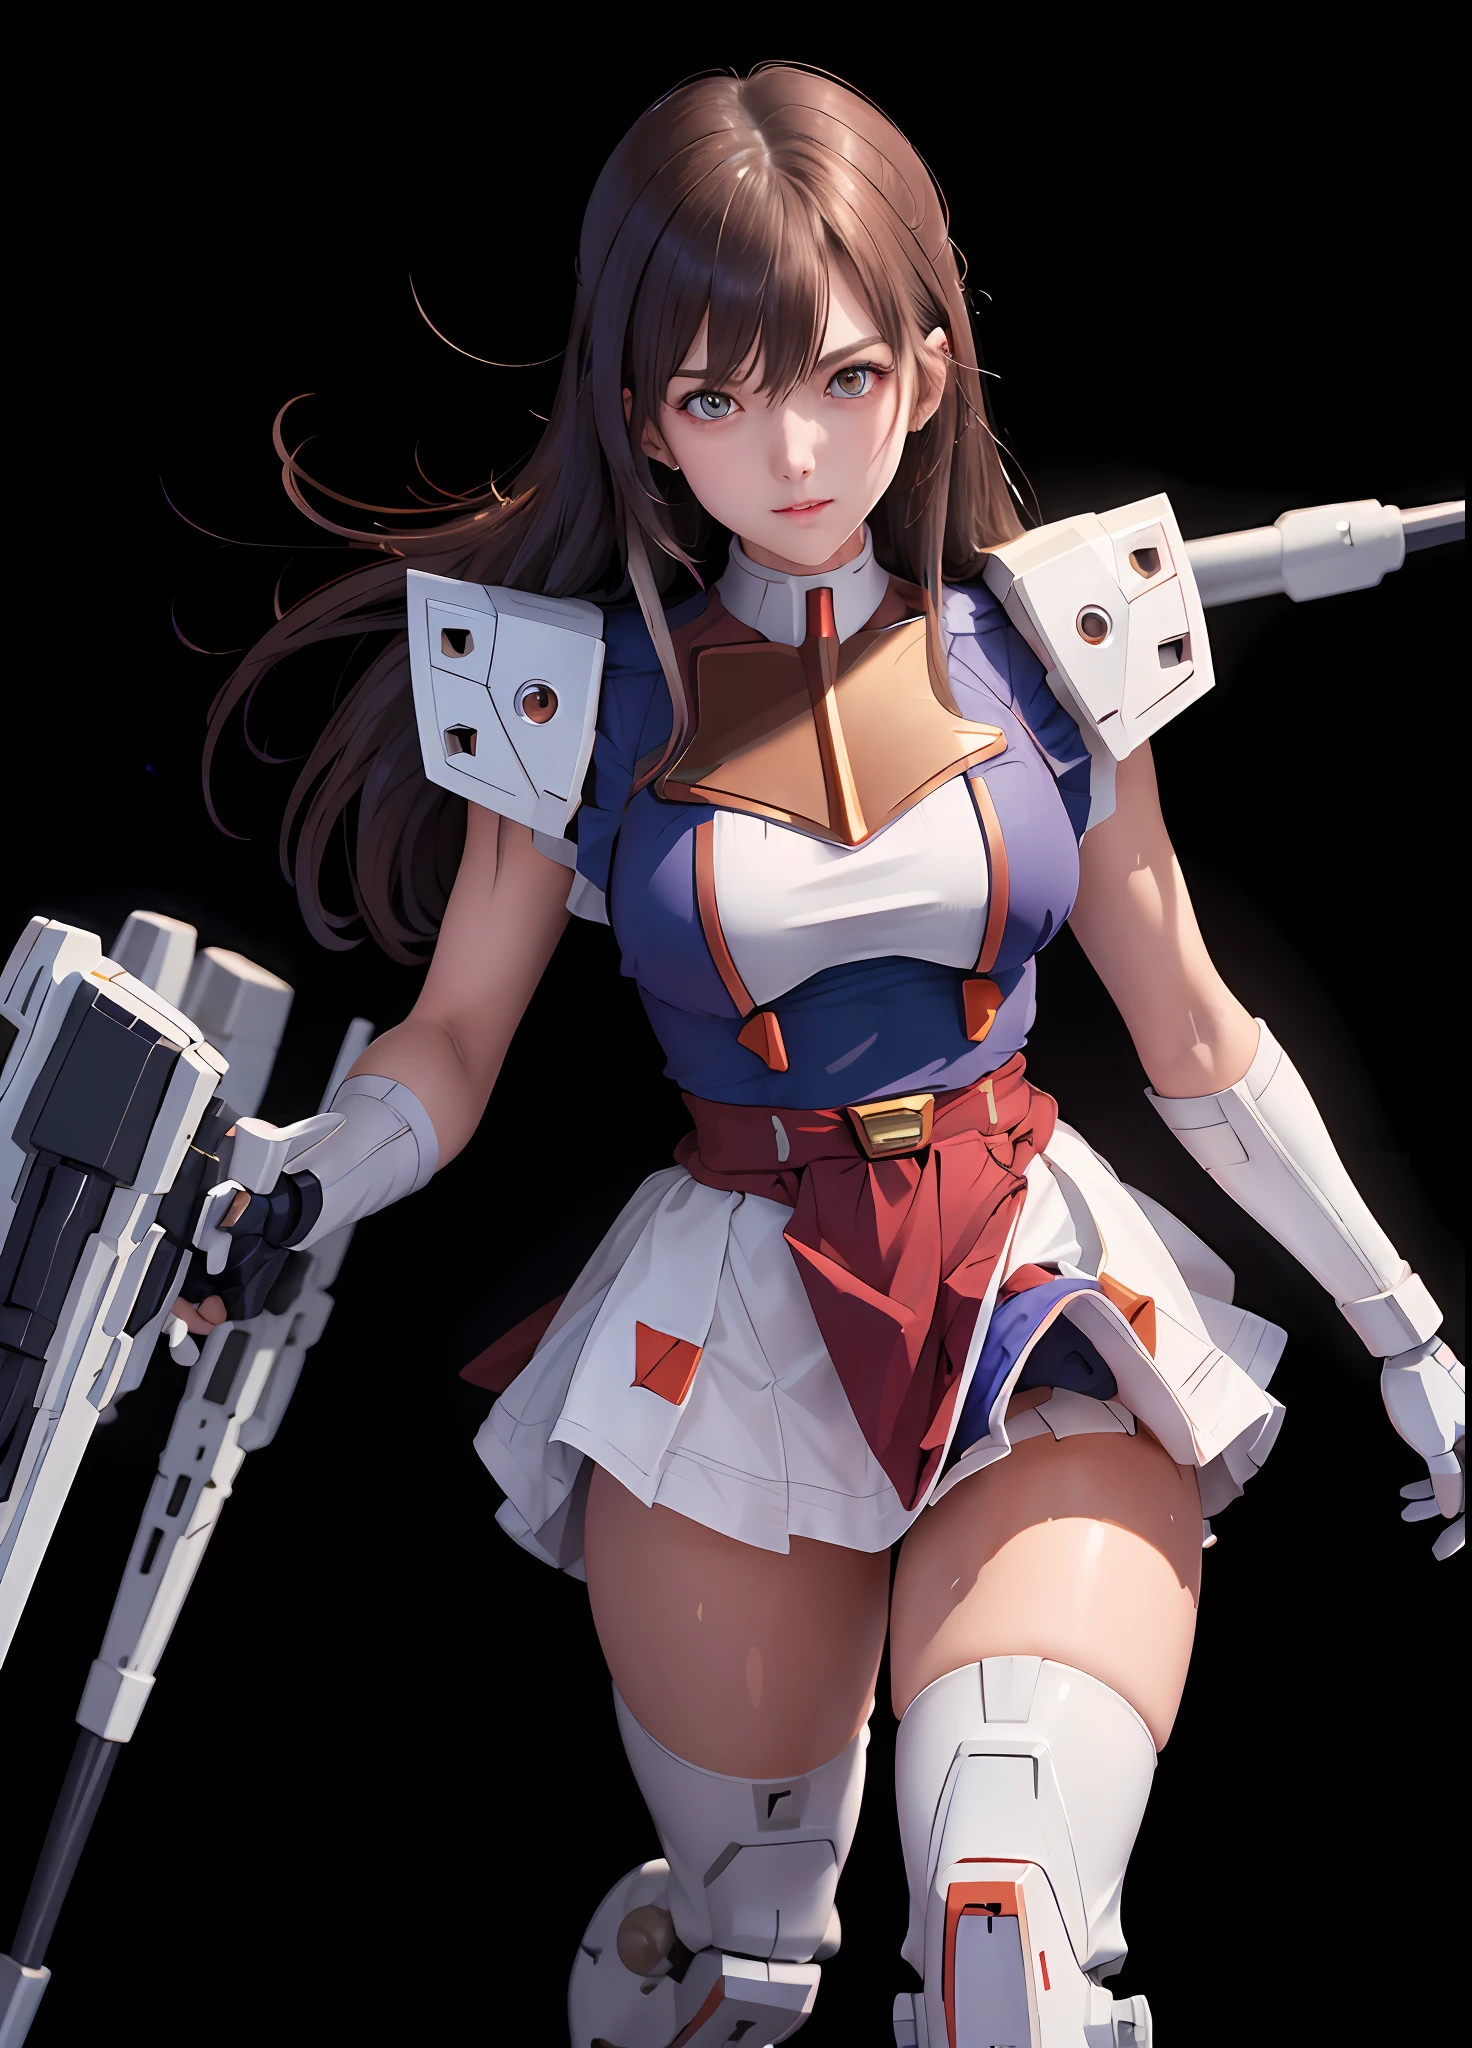 (top quality), (masterpiece), personification of Mobile Suit Gundam F91, nsfw, amazing highlights of the upper body, powerful mechs, girl with beam rifle, absolute area, moist wet slightly thick thighs, dignified full-body pose, short skirt, beautiful lighting